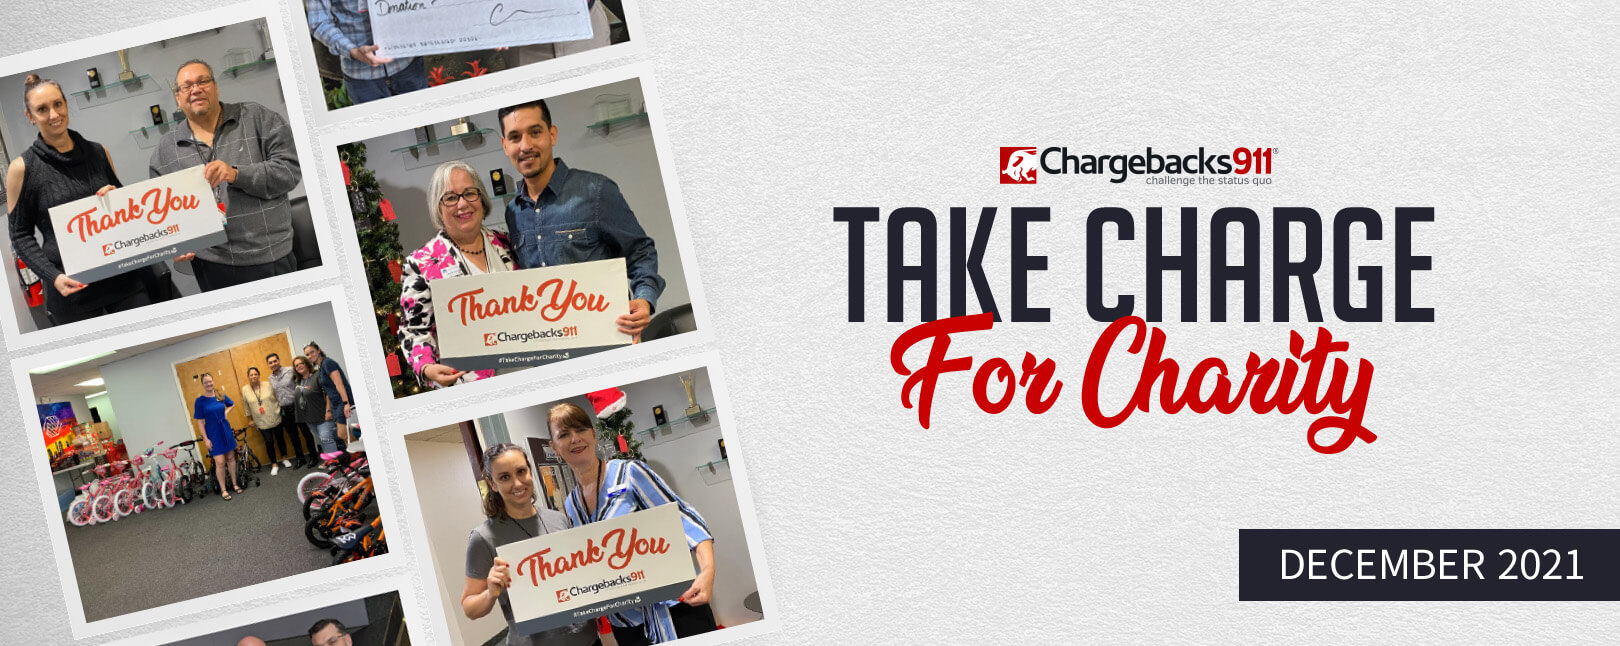 Take Charge for Charity - December 2021